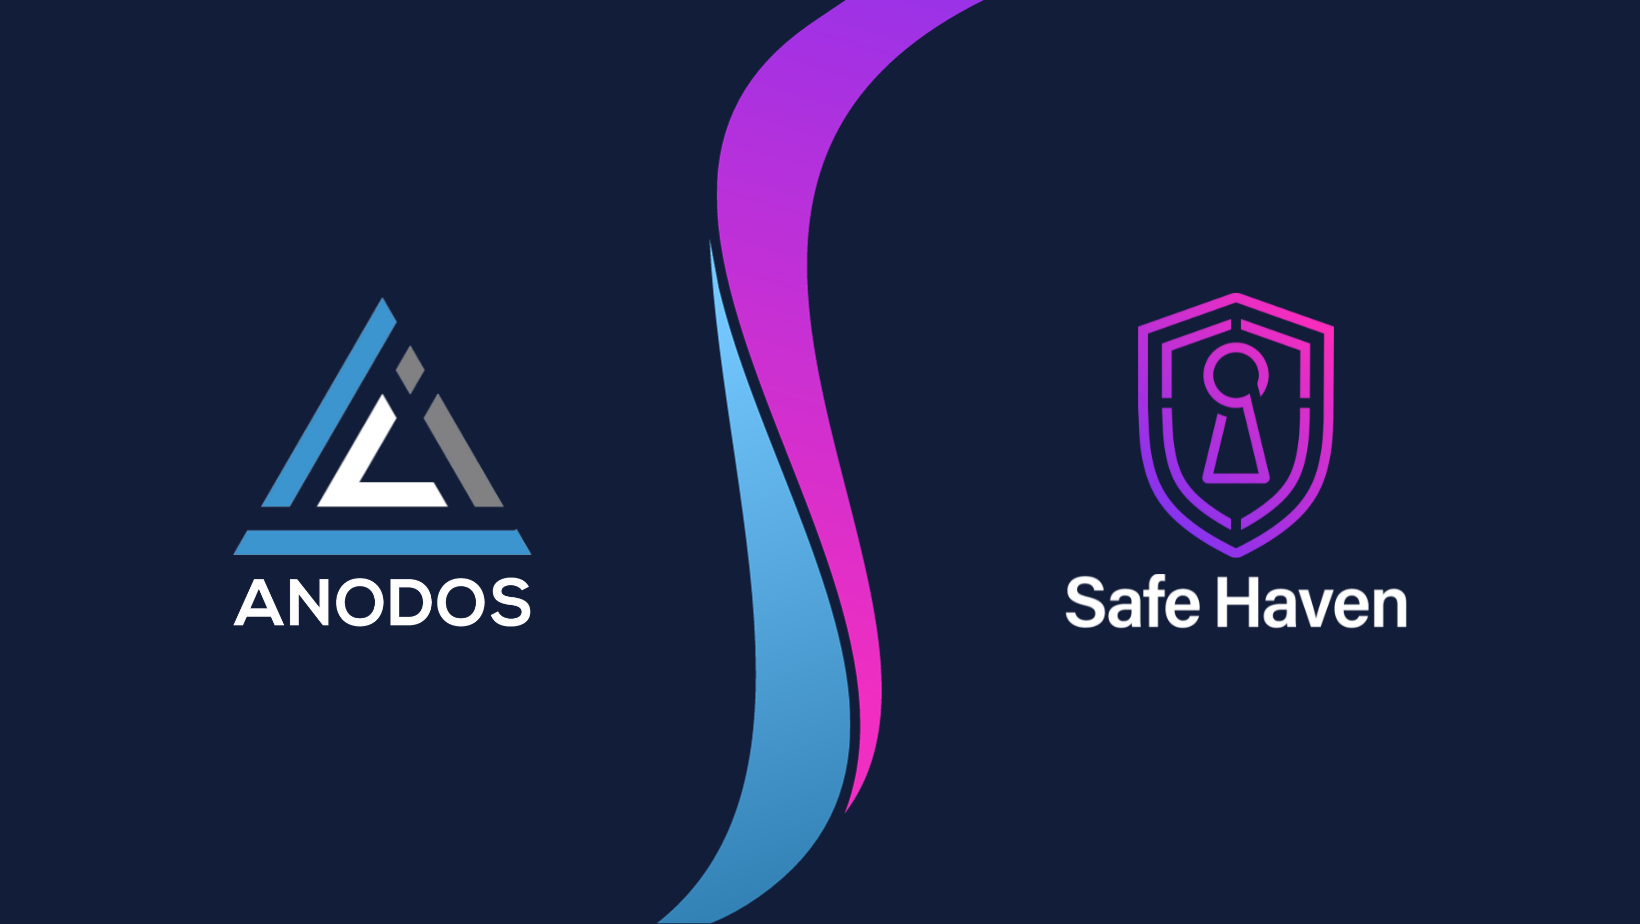 Anodos partners with Safe Haven to bring SHA and Inheriti® plans on the XRP Ledger